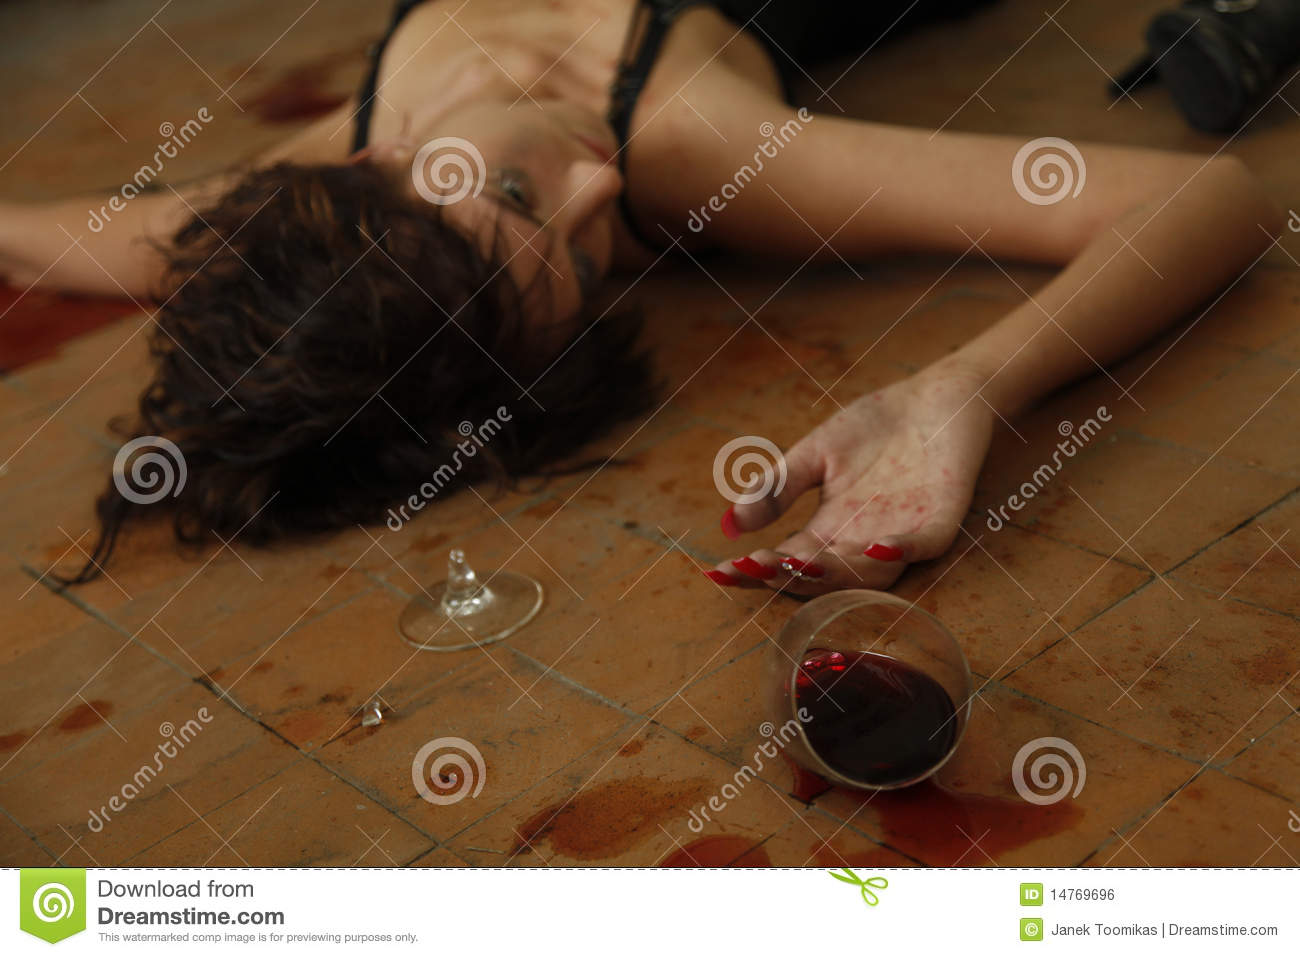 Dead Woman On The Floor Royalty Free Stock Image   Image  14769696